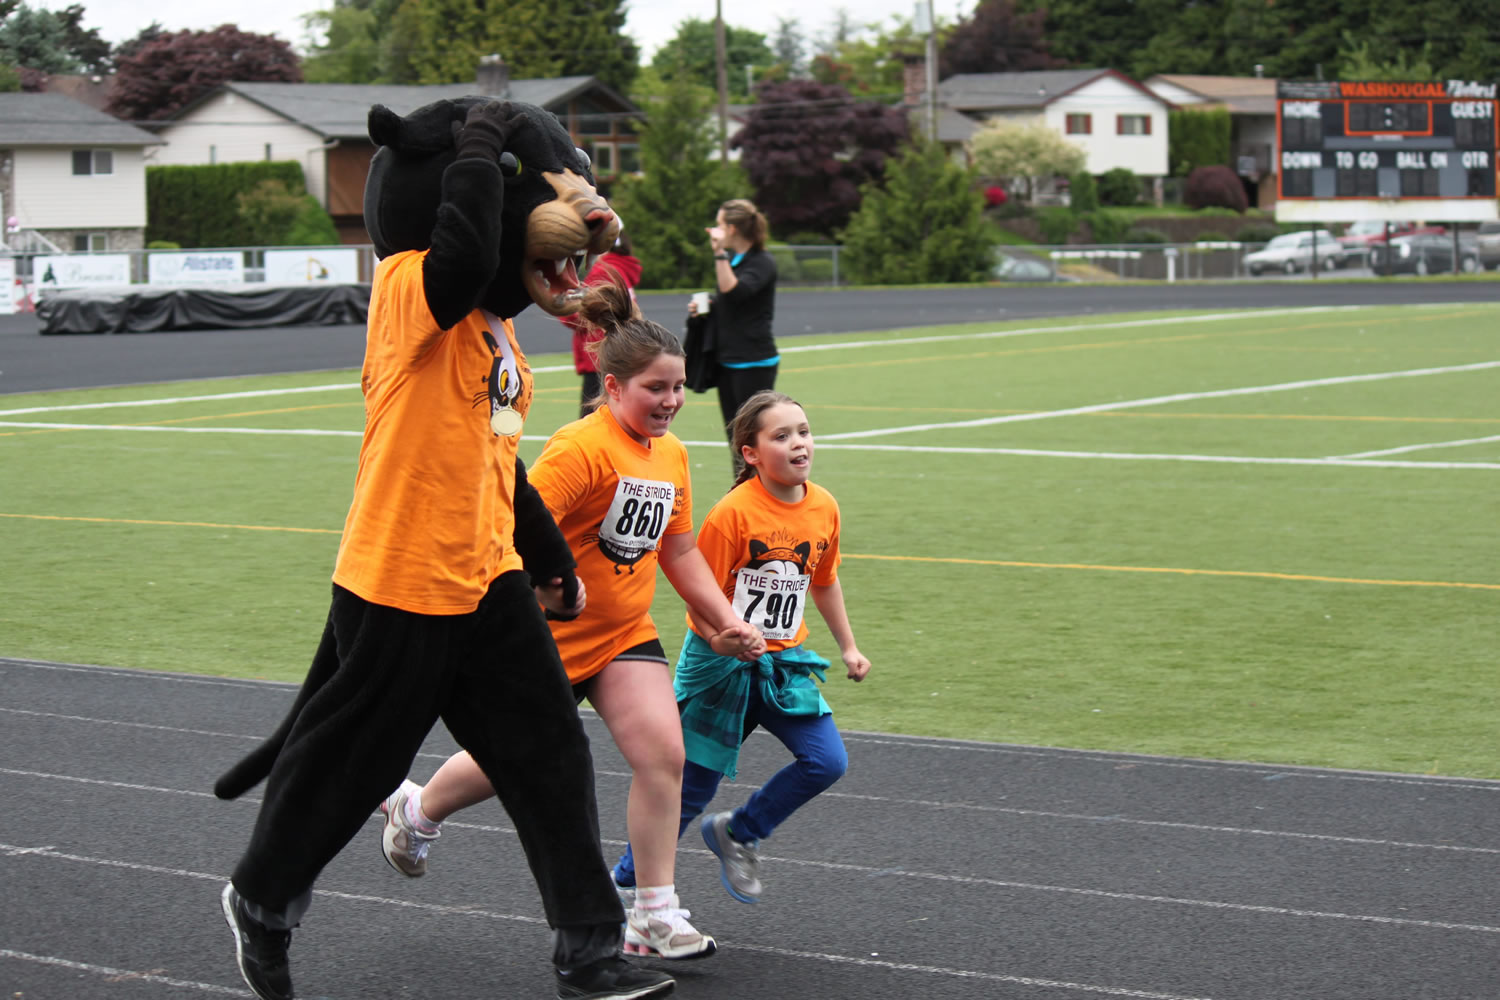 The Washougal High School Panther mascot encourages youngsters as they cross the finish line during Saturday's 10th annual Student Stride for Education at Fishback Stadium.